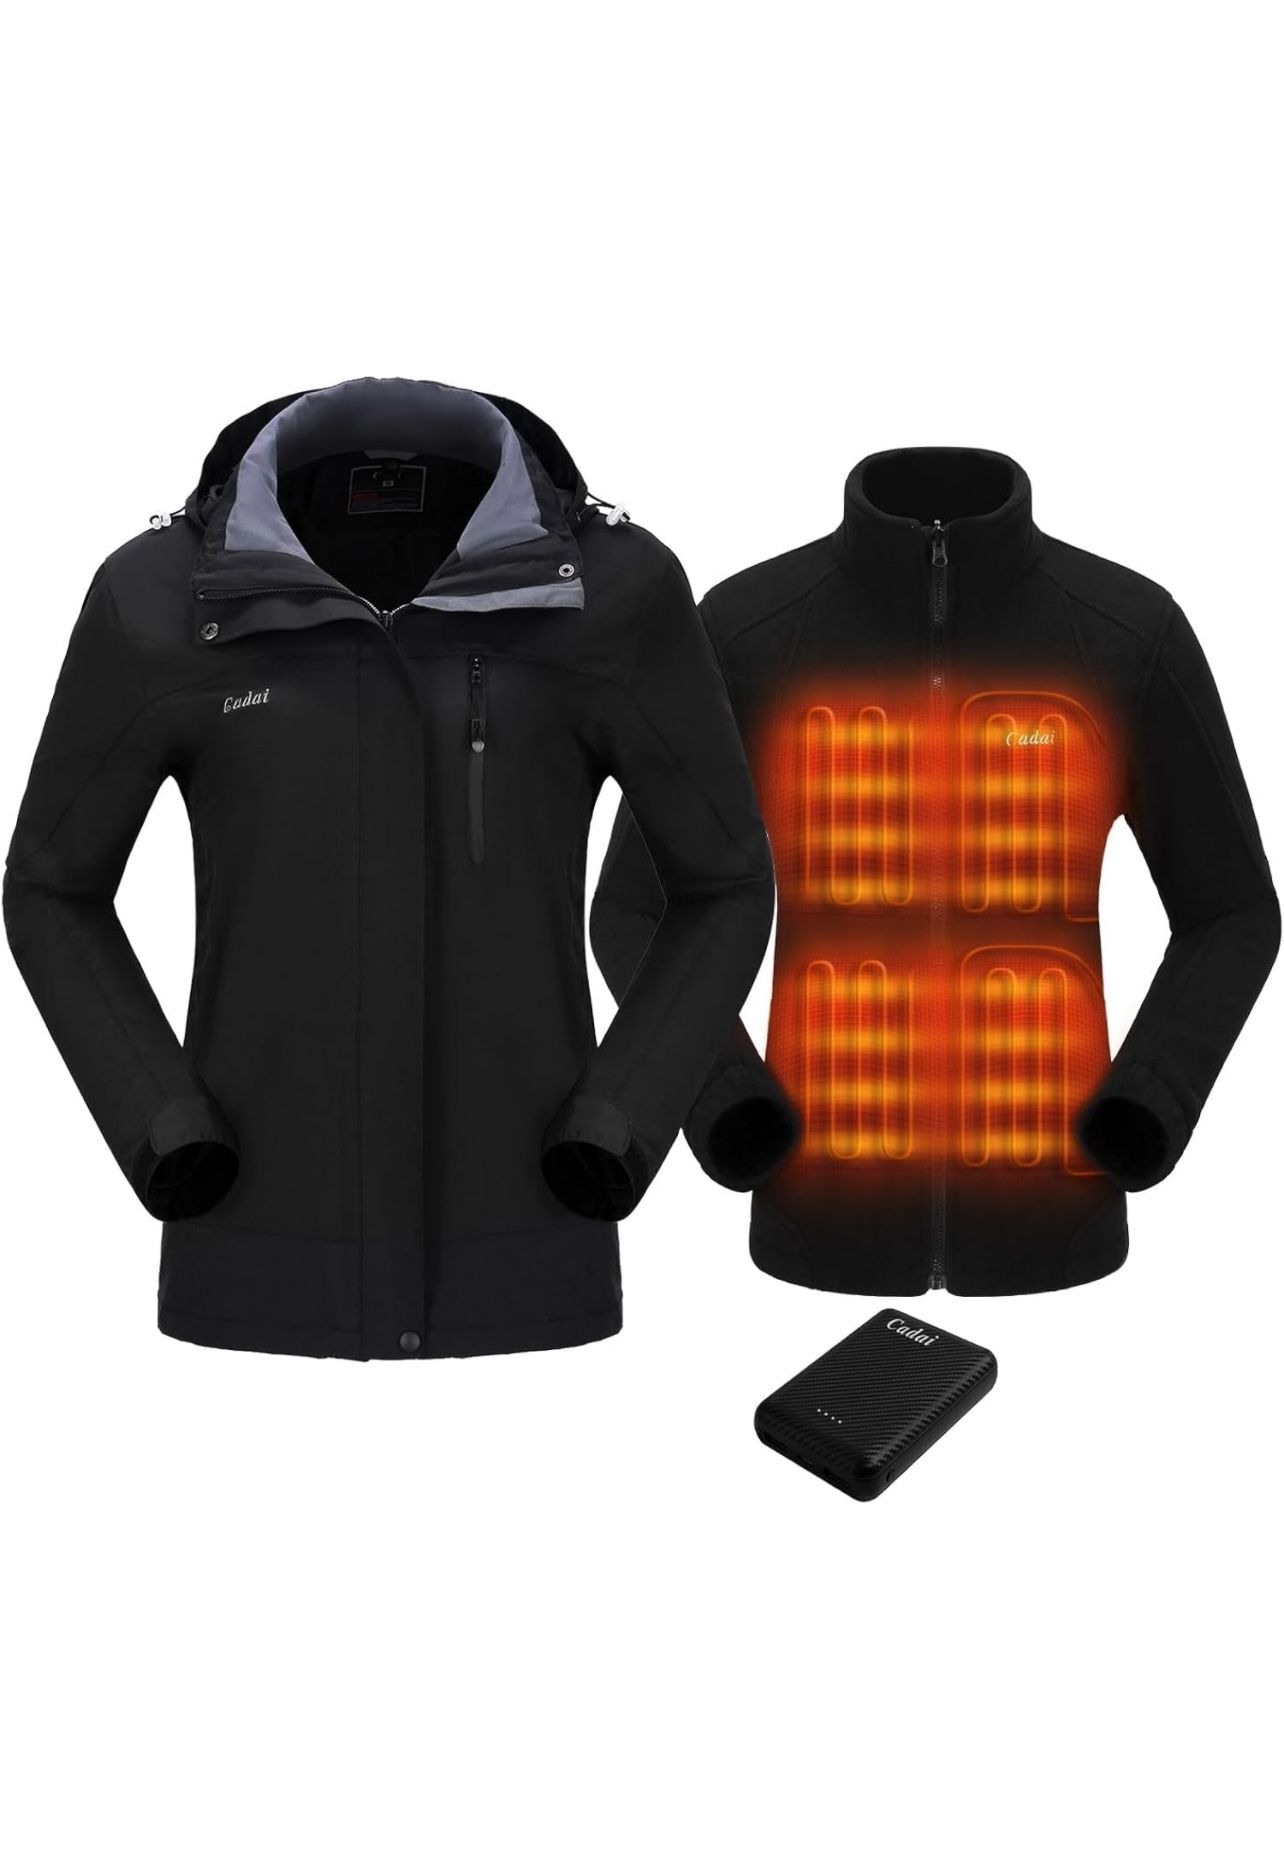 3-in-1 Heated Jacket with Battery Pack 5.2V, Waterproof Heated Coat (size Large